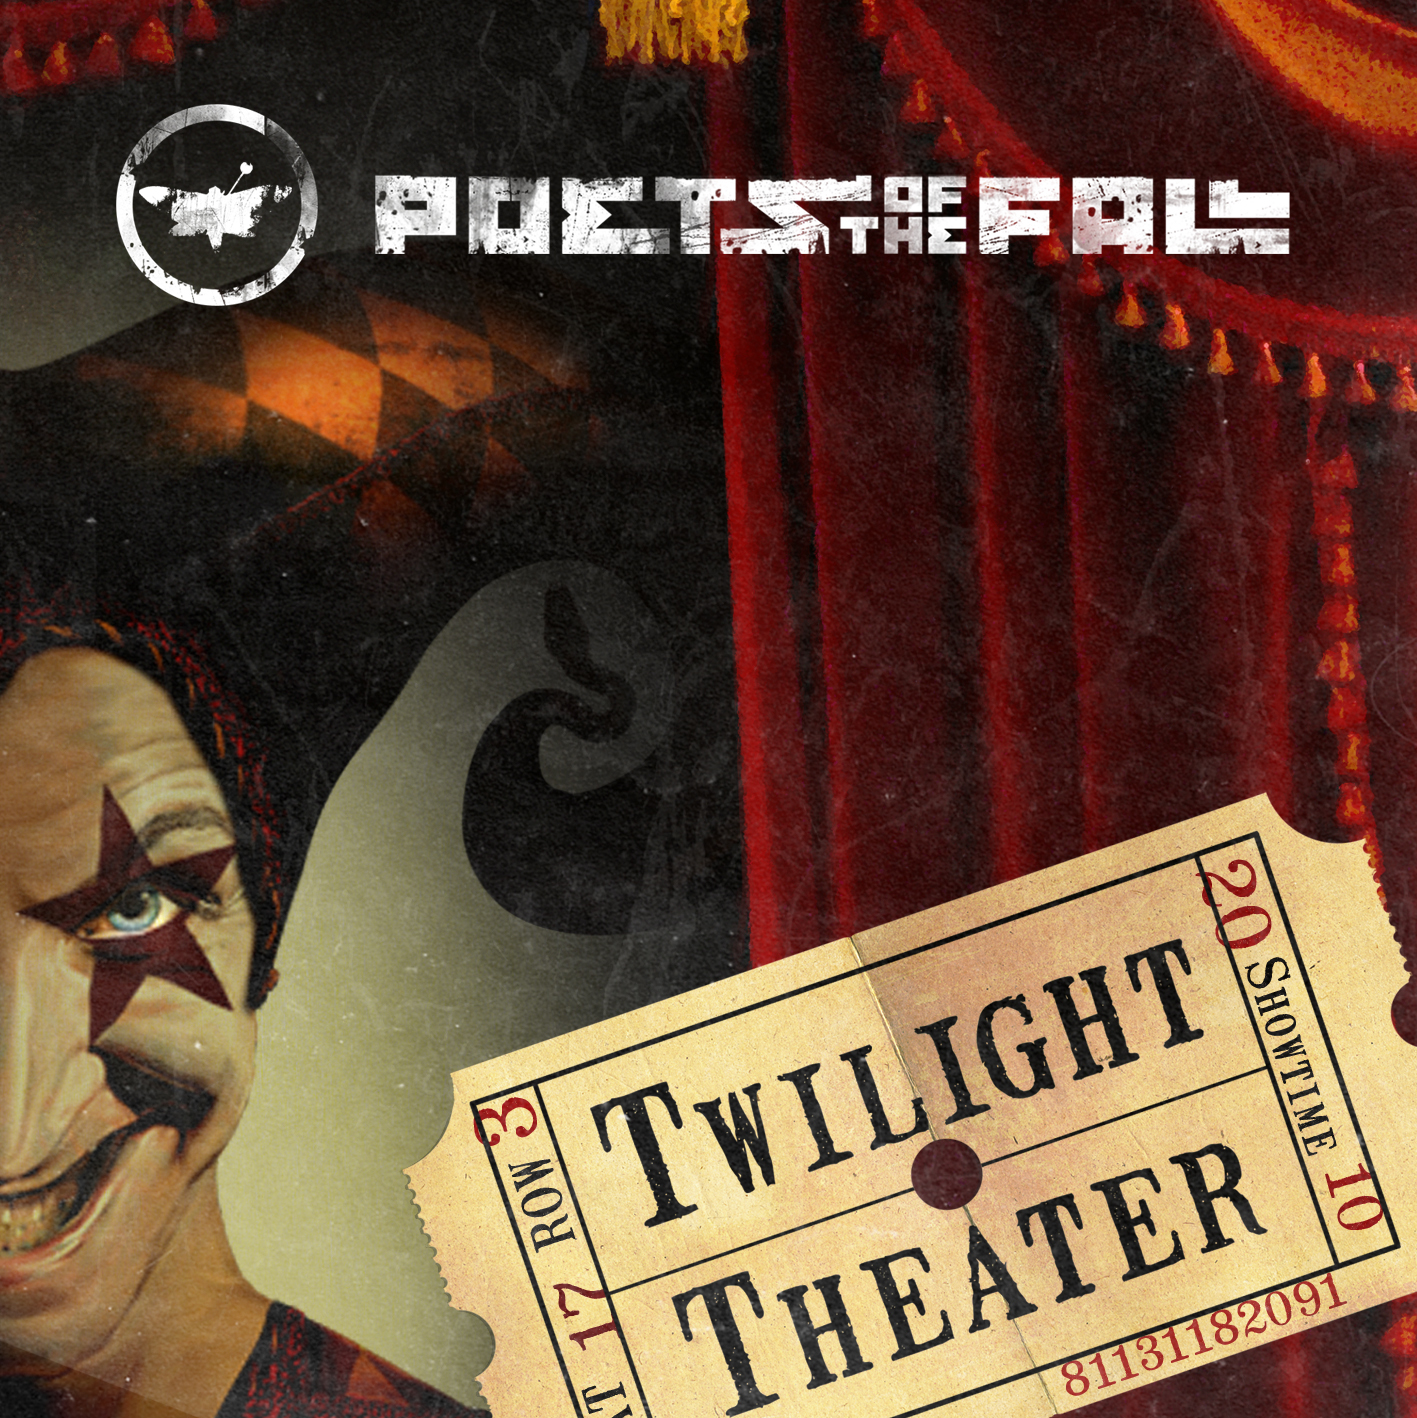 Poets of the Fall - Twilight Theater - CD